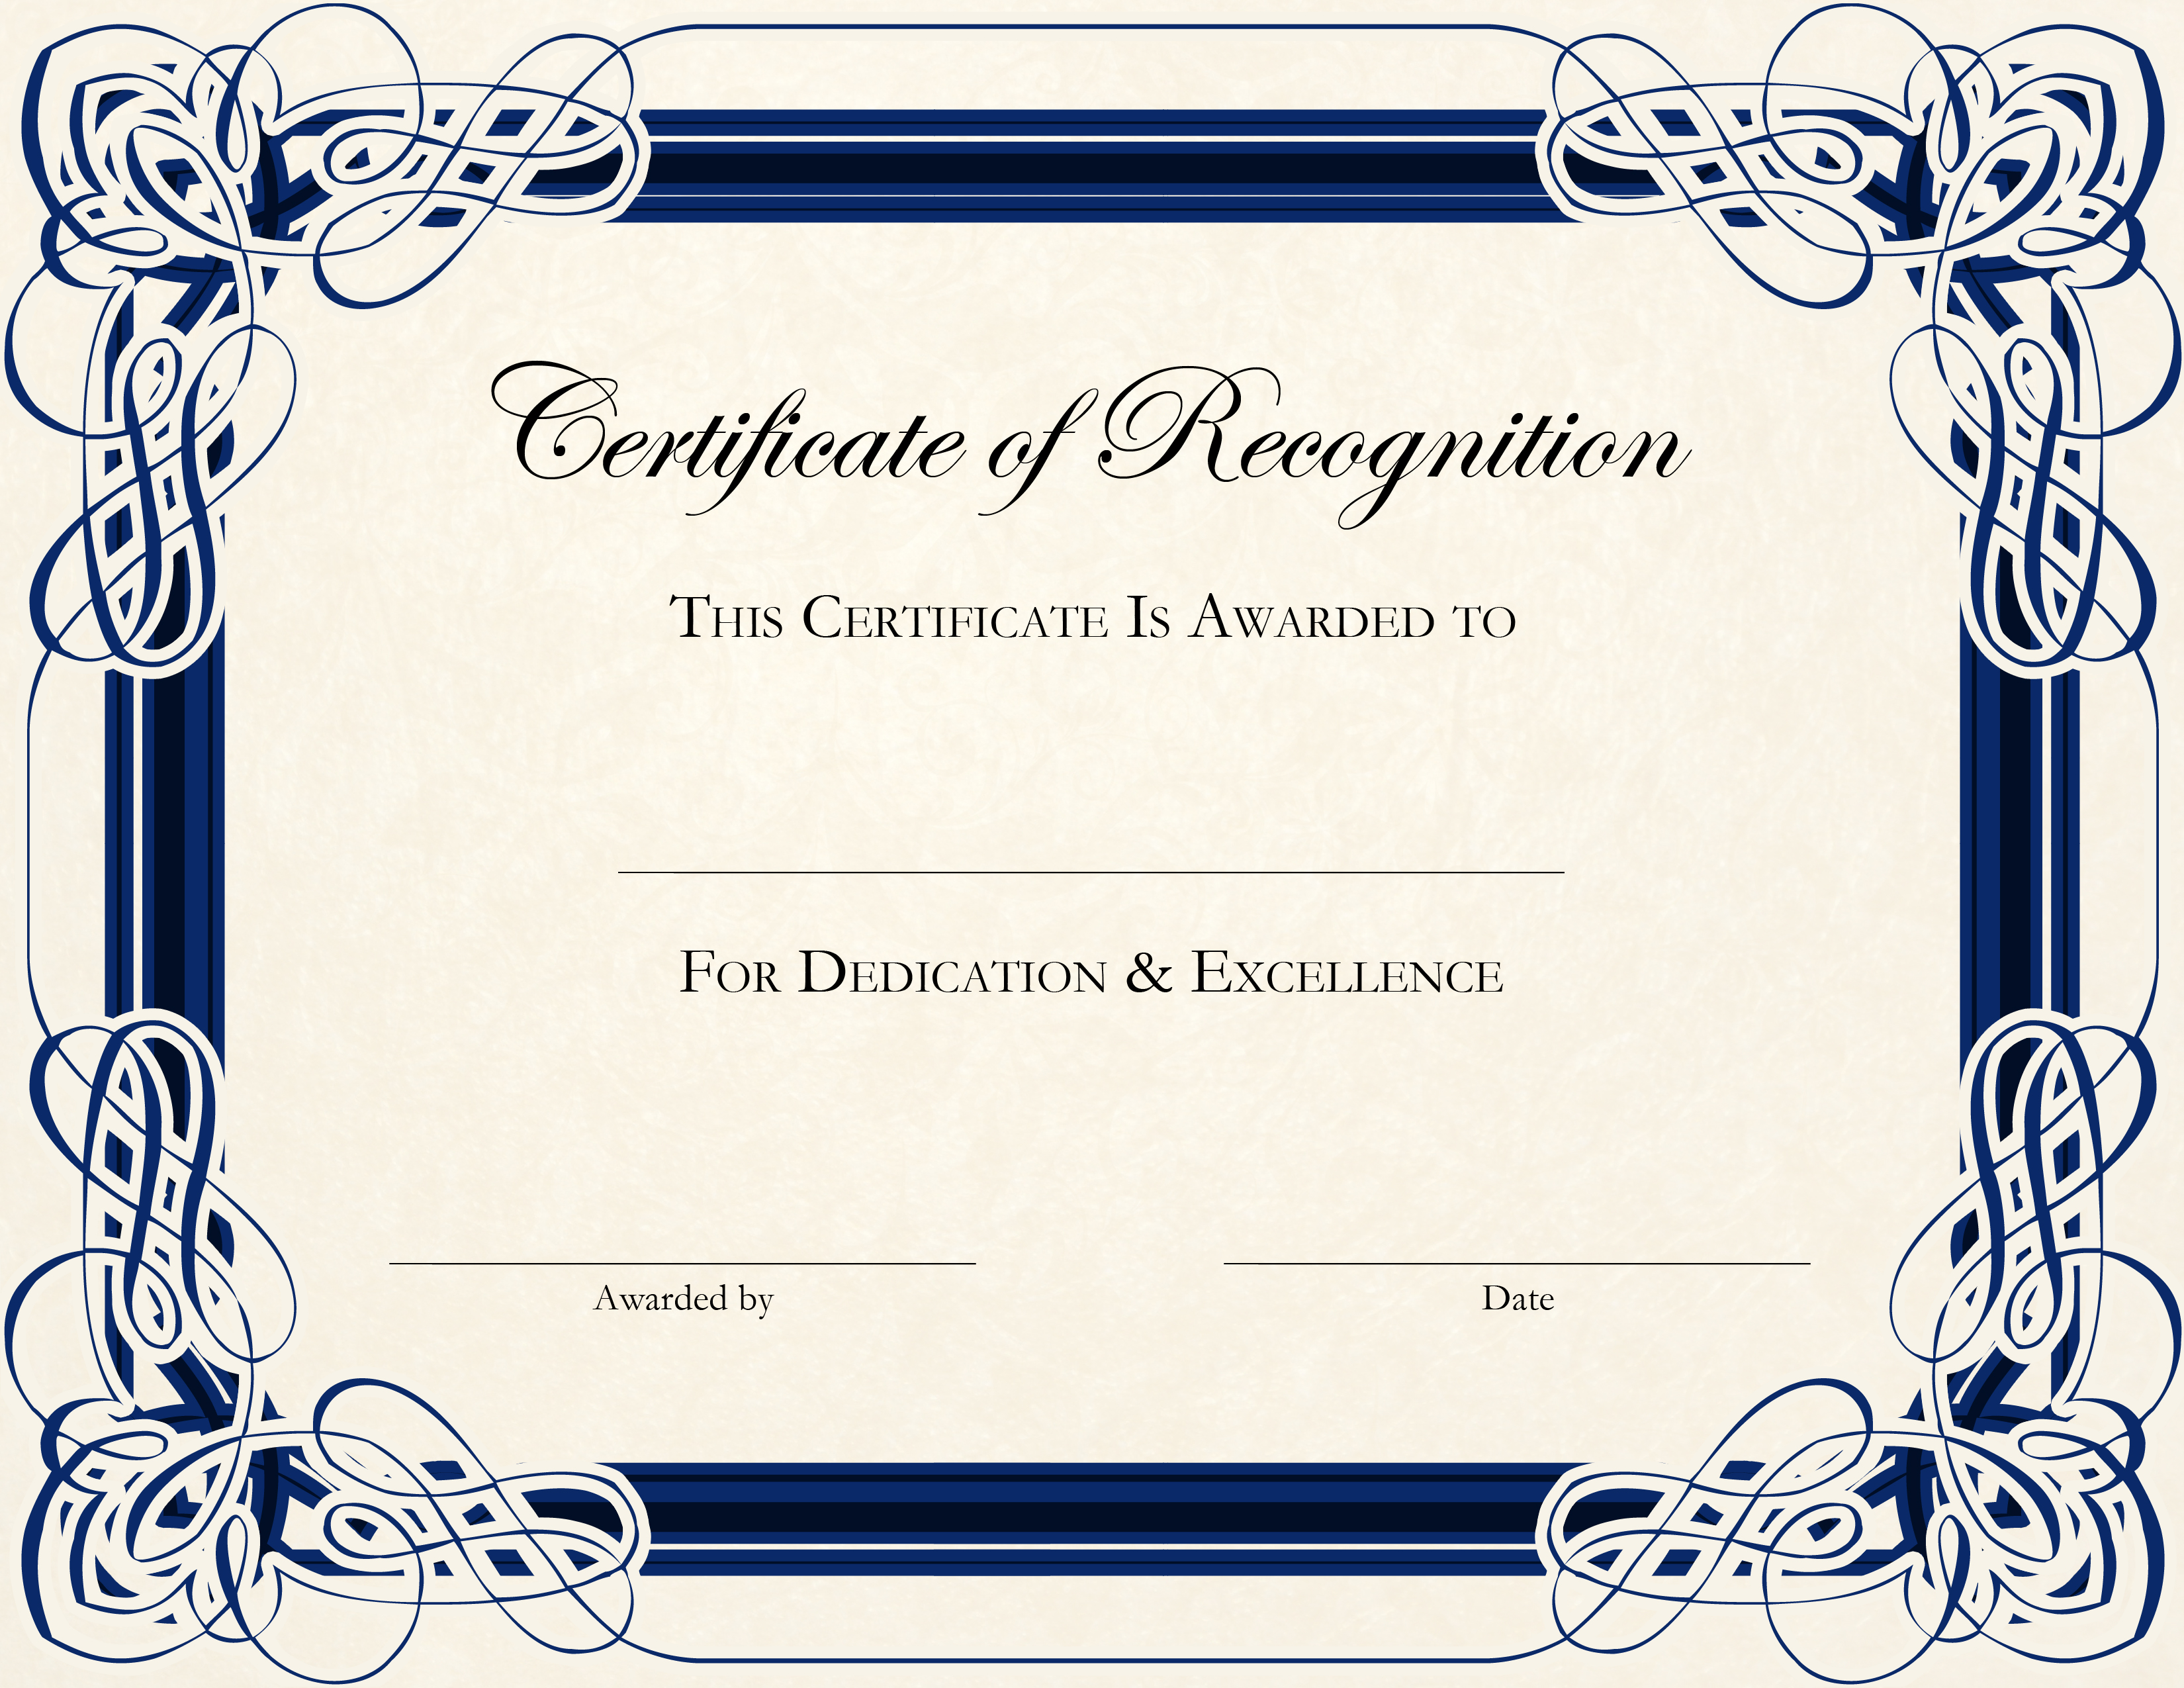 22 Editable Microsoft Certificate Templates Images - Free Editable Pertaining To Blank Certificate Of Achievement Template